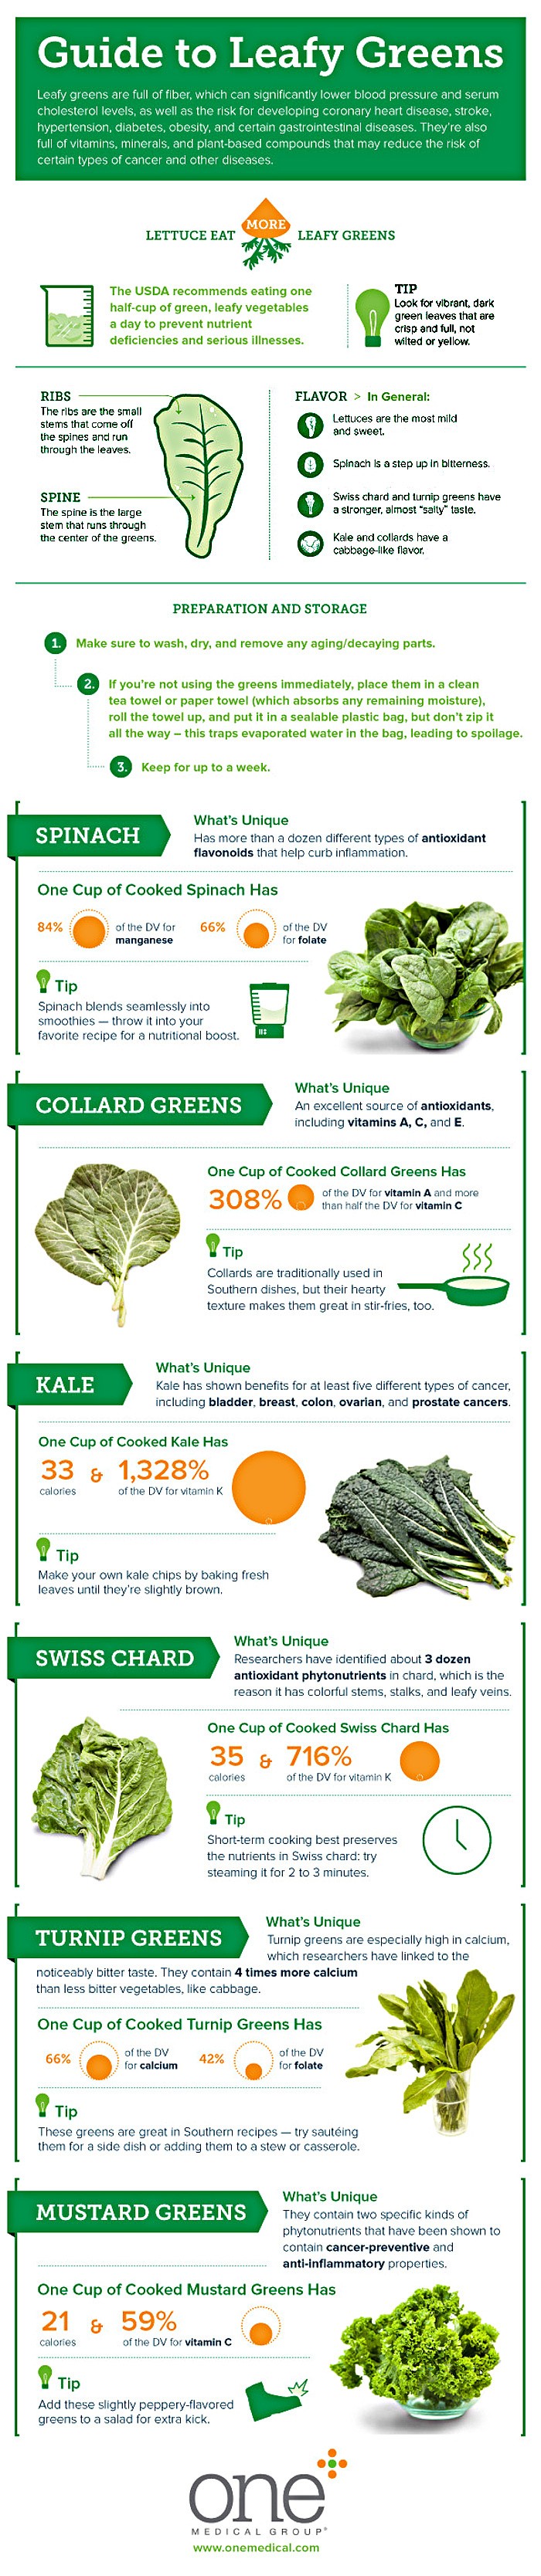 Field Guide to Leafy Greens